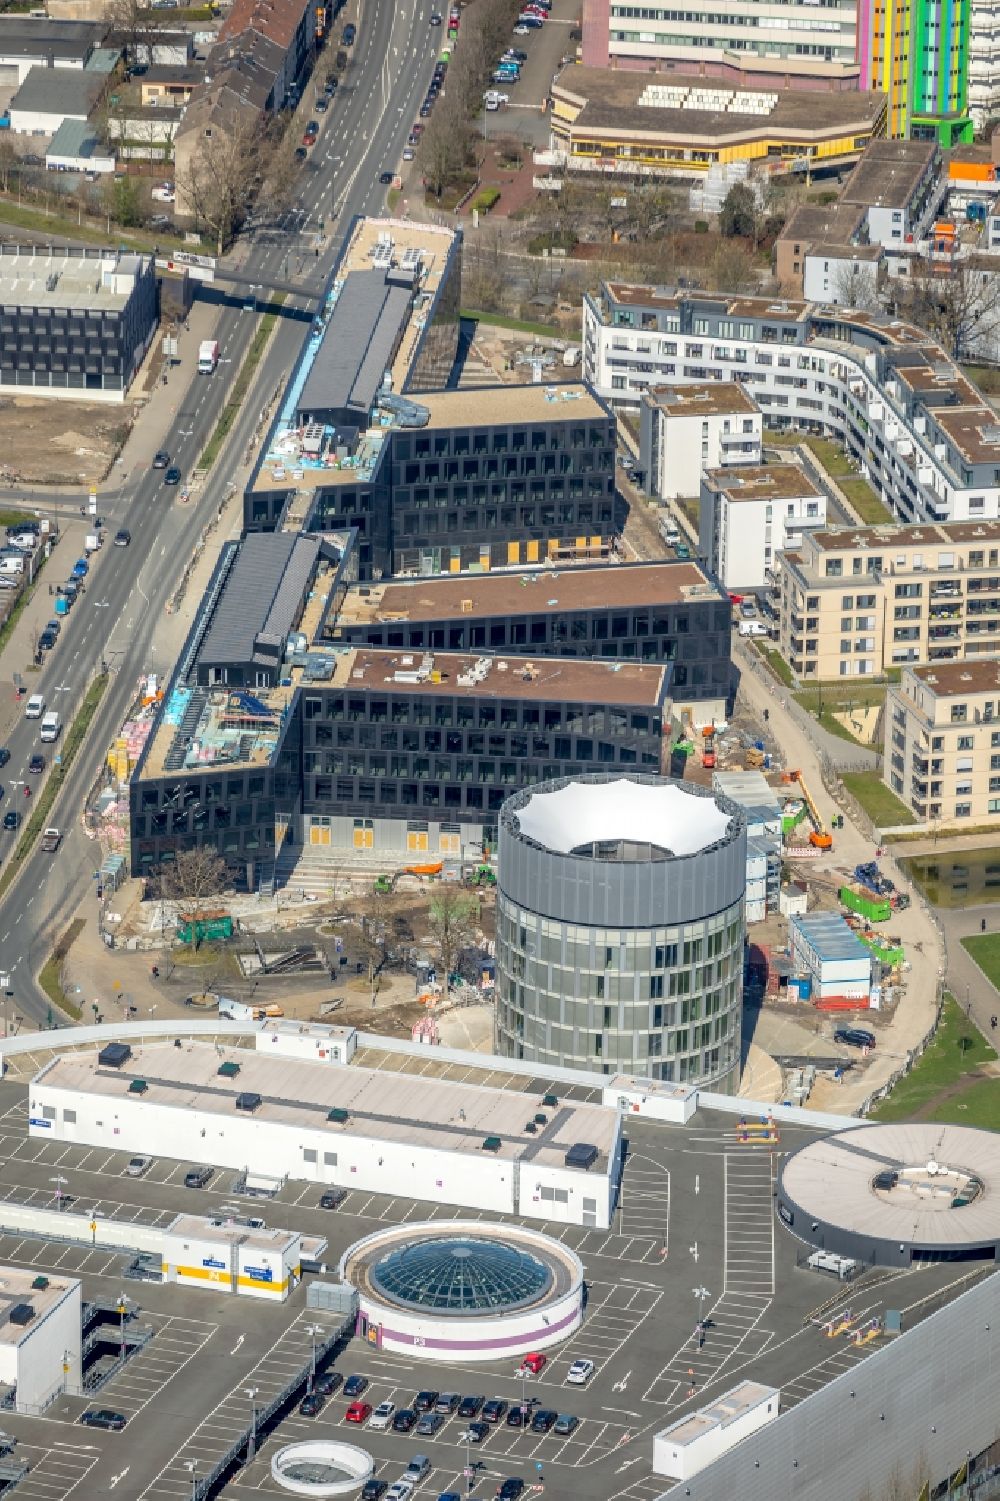 Aerial image Essen - Construction site for the office building of Funke Media Group on Berliner Platz in Essen in the state of North Rhine-Westphalia